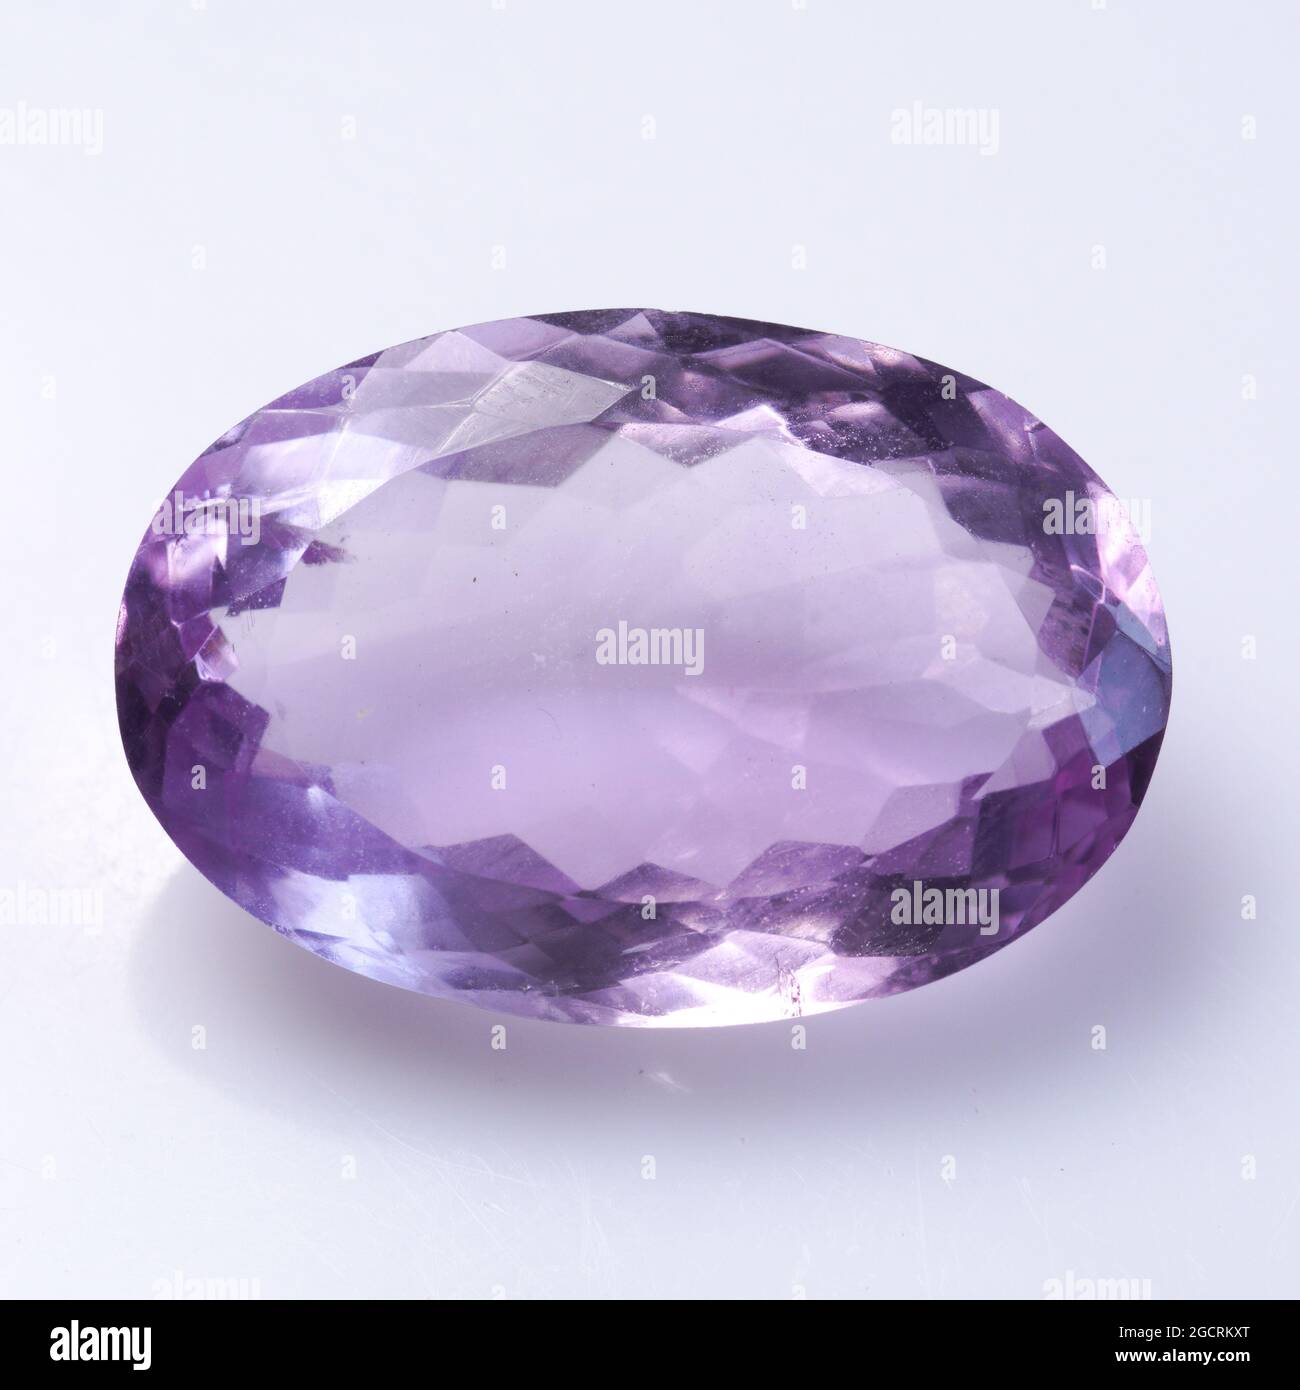 Natural stone amethyst on background Stock Photo